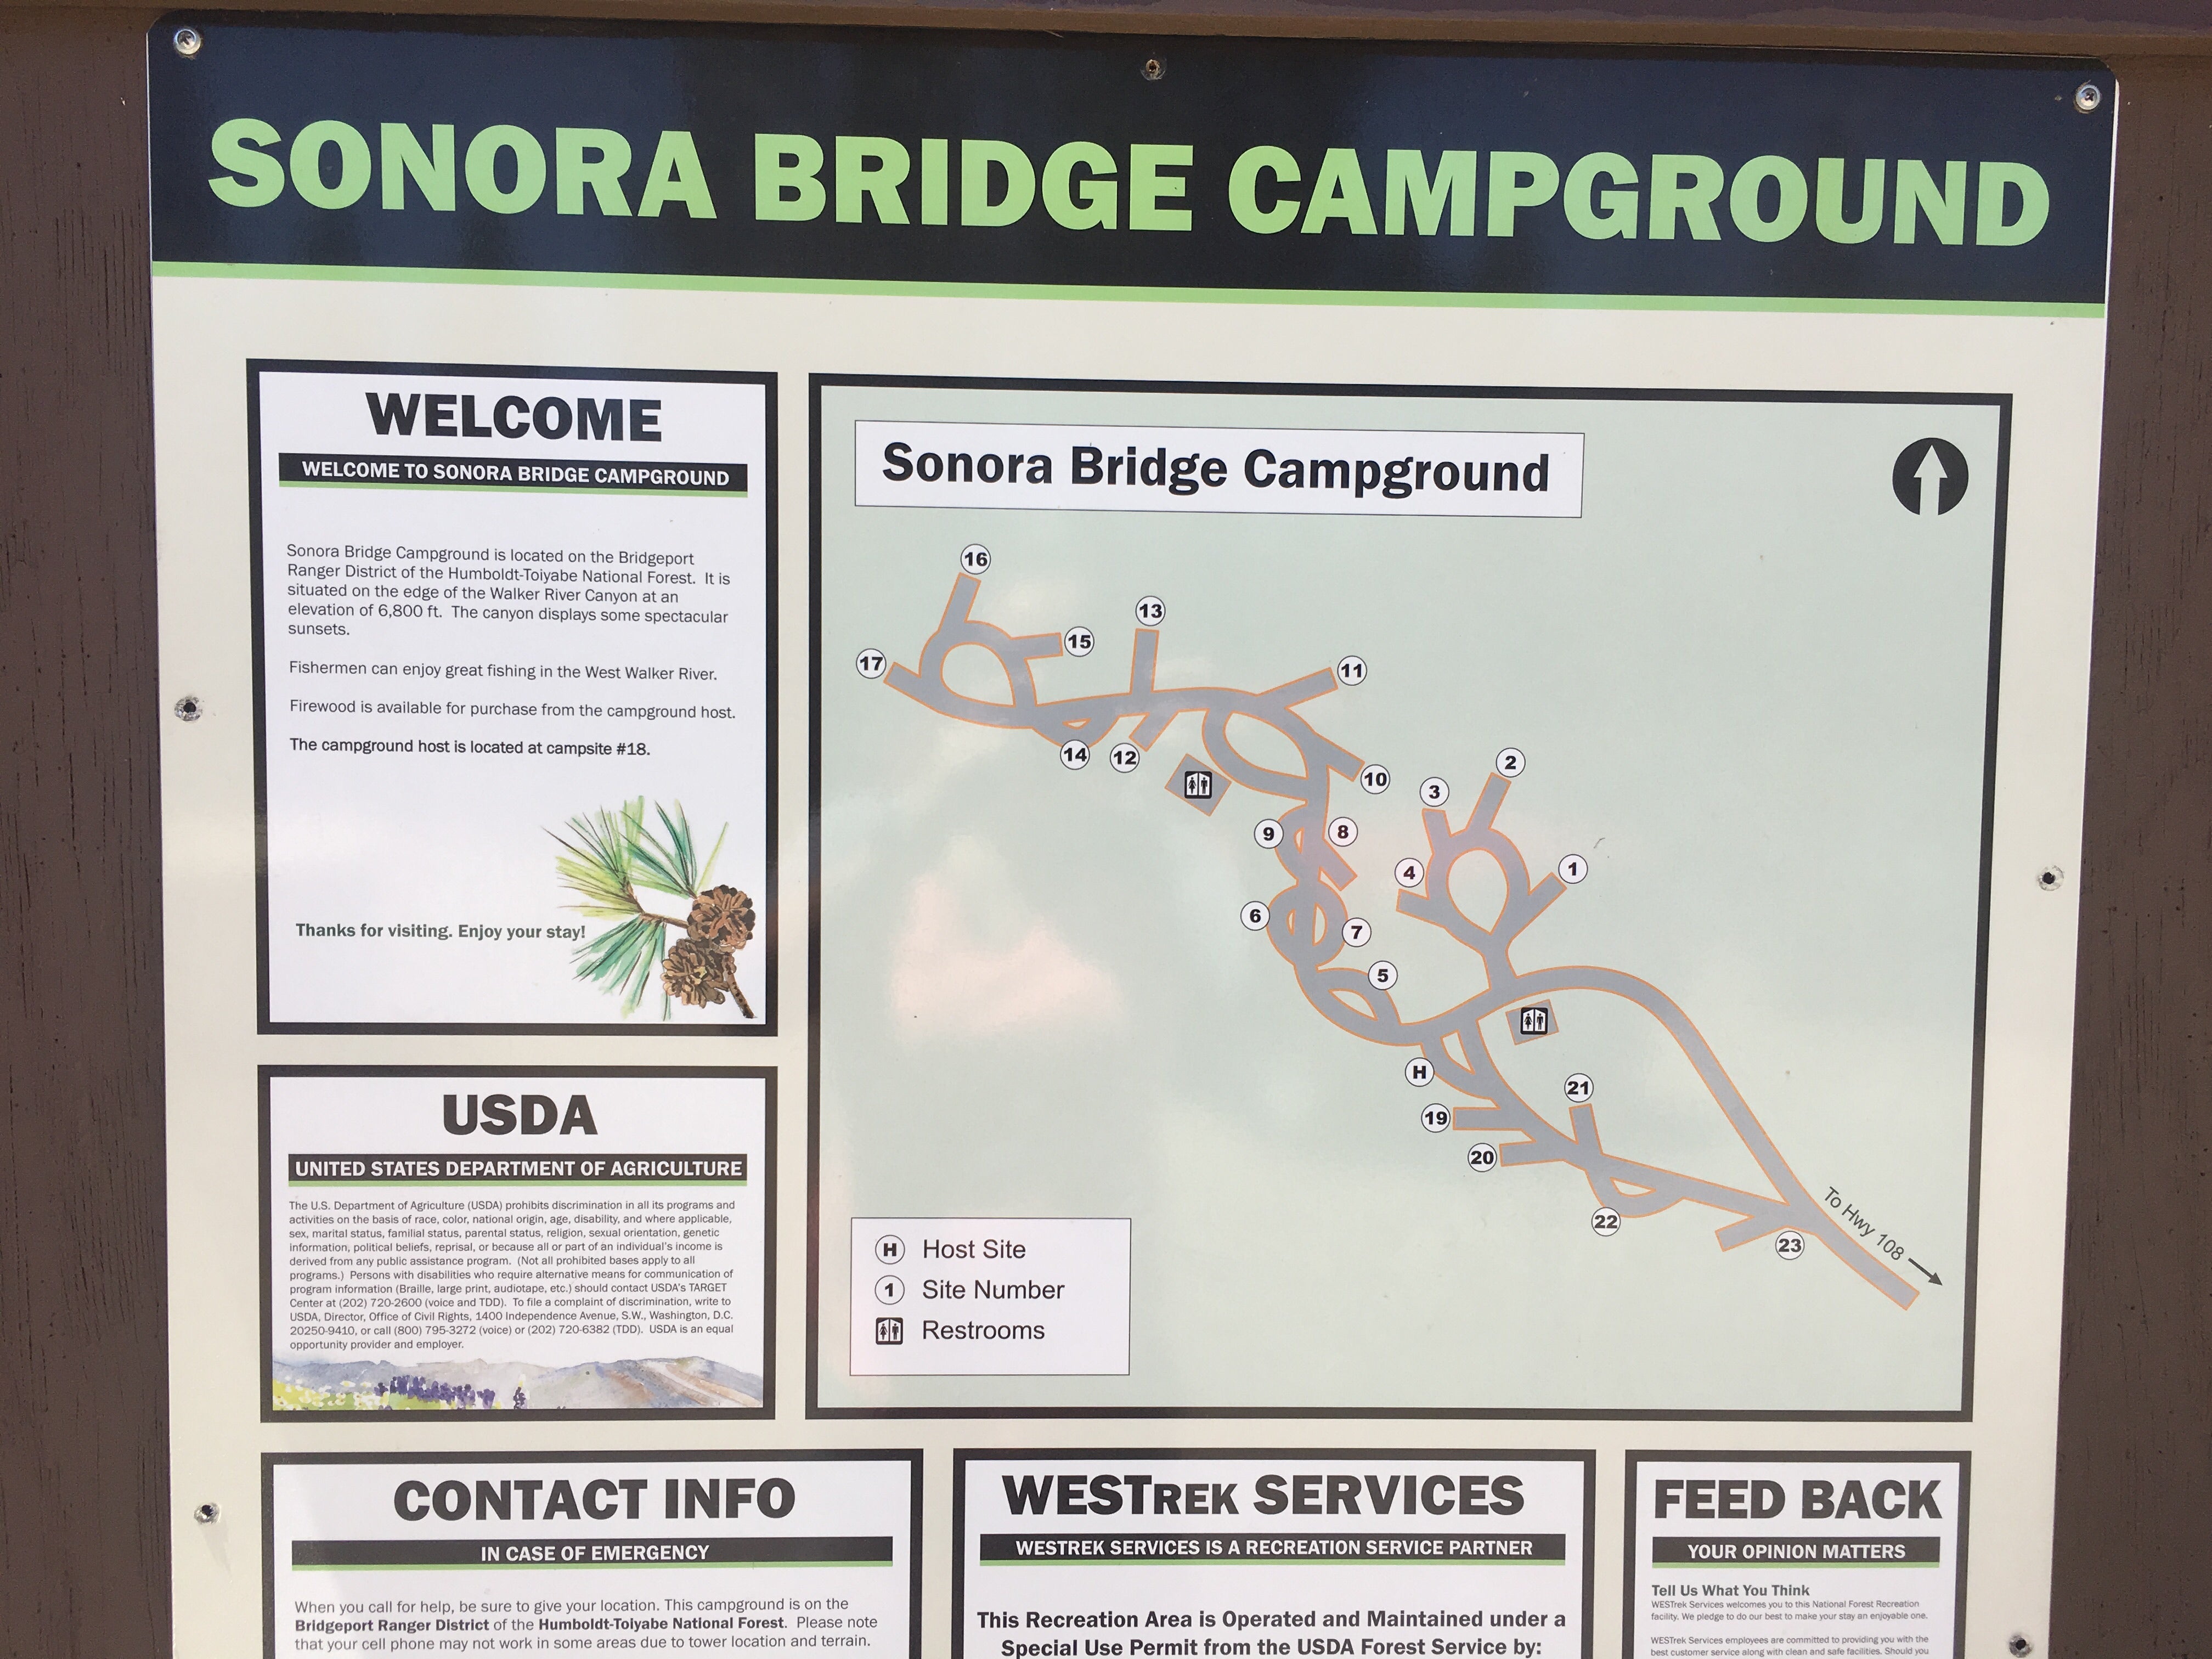 Camper submitted image from Sonora Bridge Campground - 3